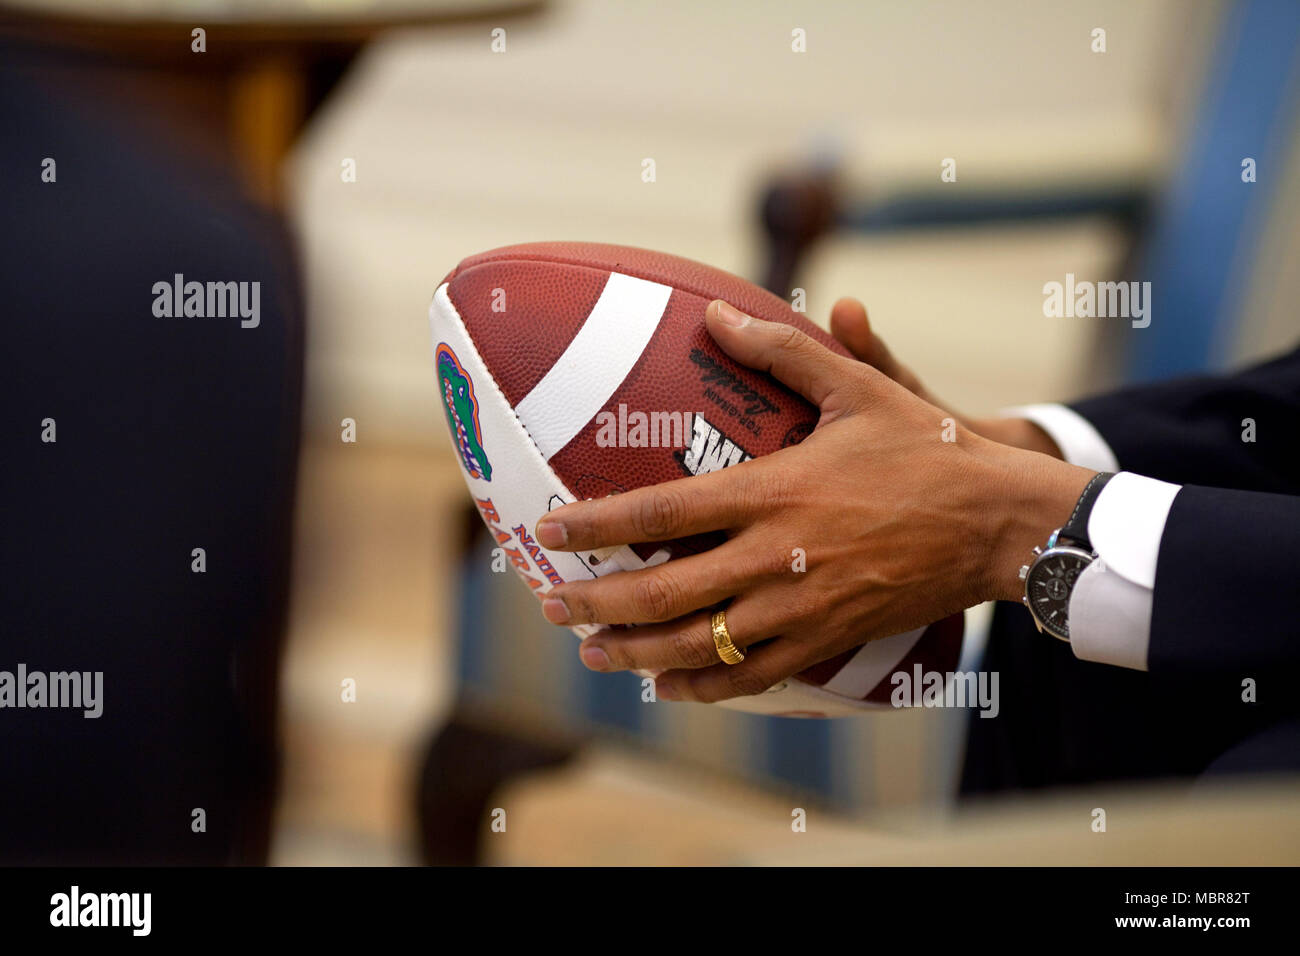 President Barack Obama holds a football during an Oval Office briefing for an upcoming healthcare meeting  May 11, 2009. Official White House Photo by Pete Souza. Stock Photo